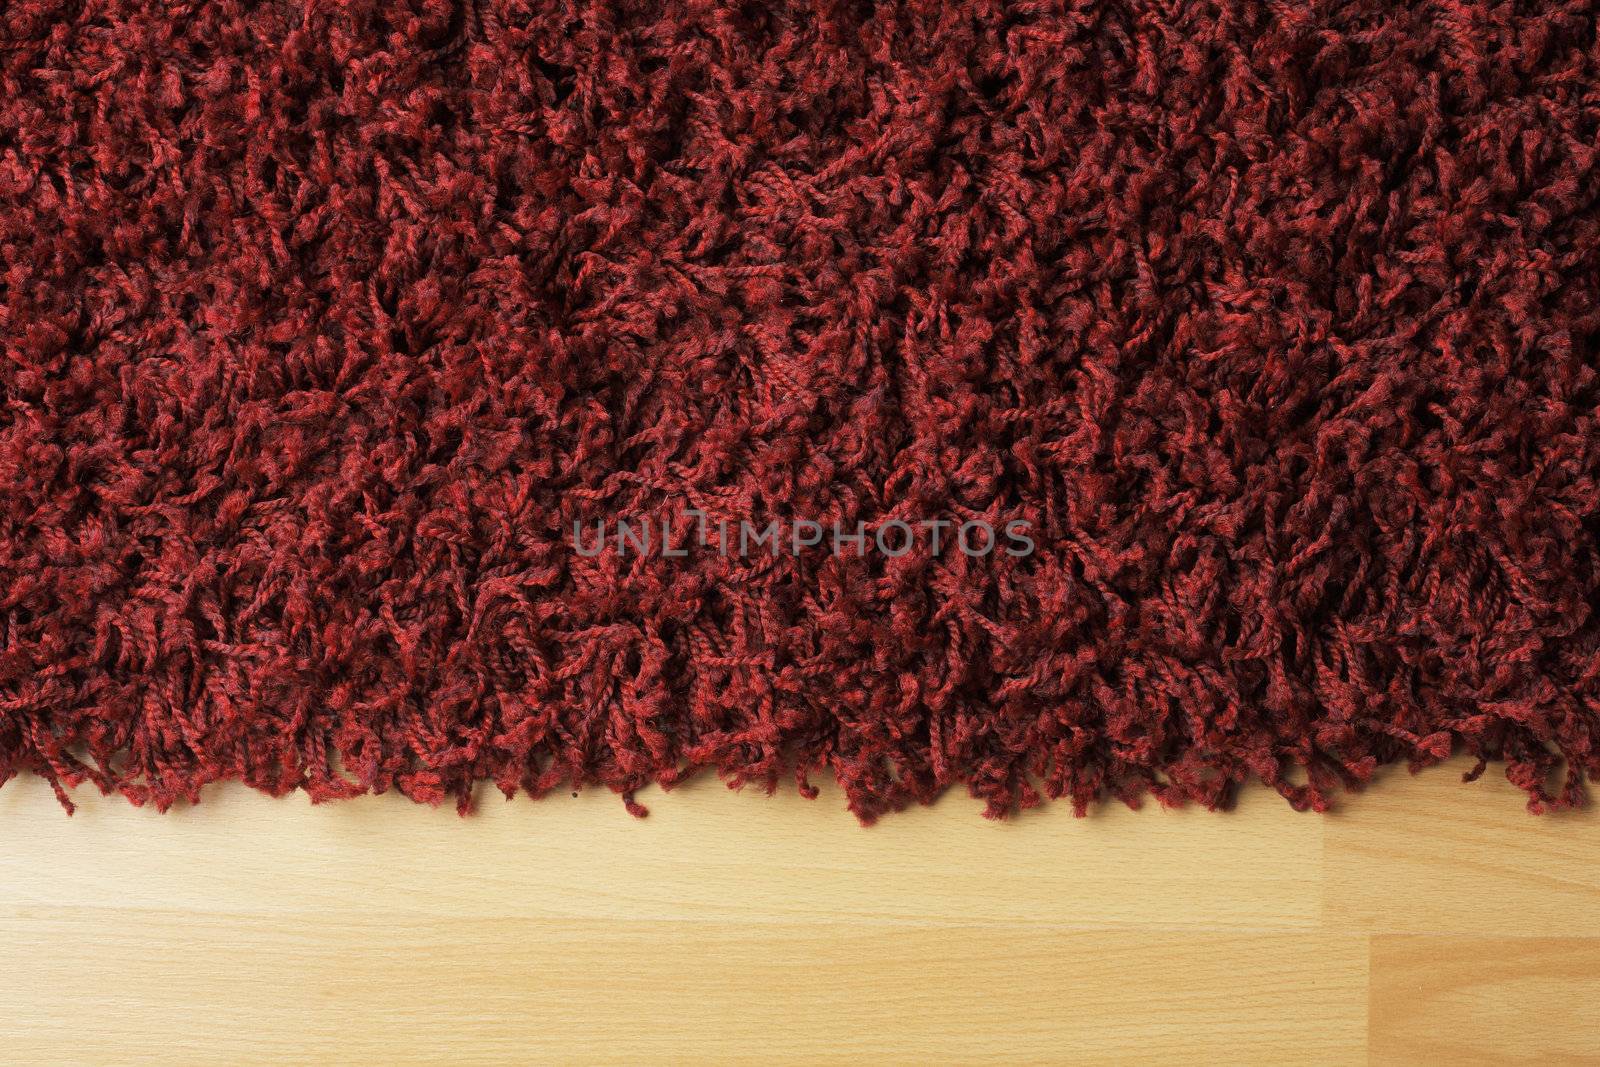 Rug by Stocksnapper